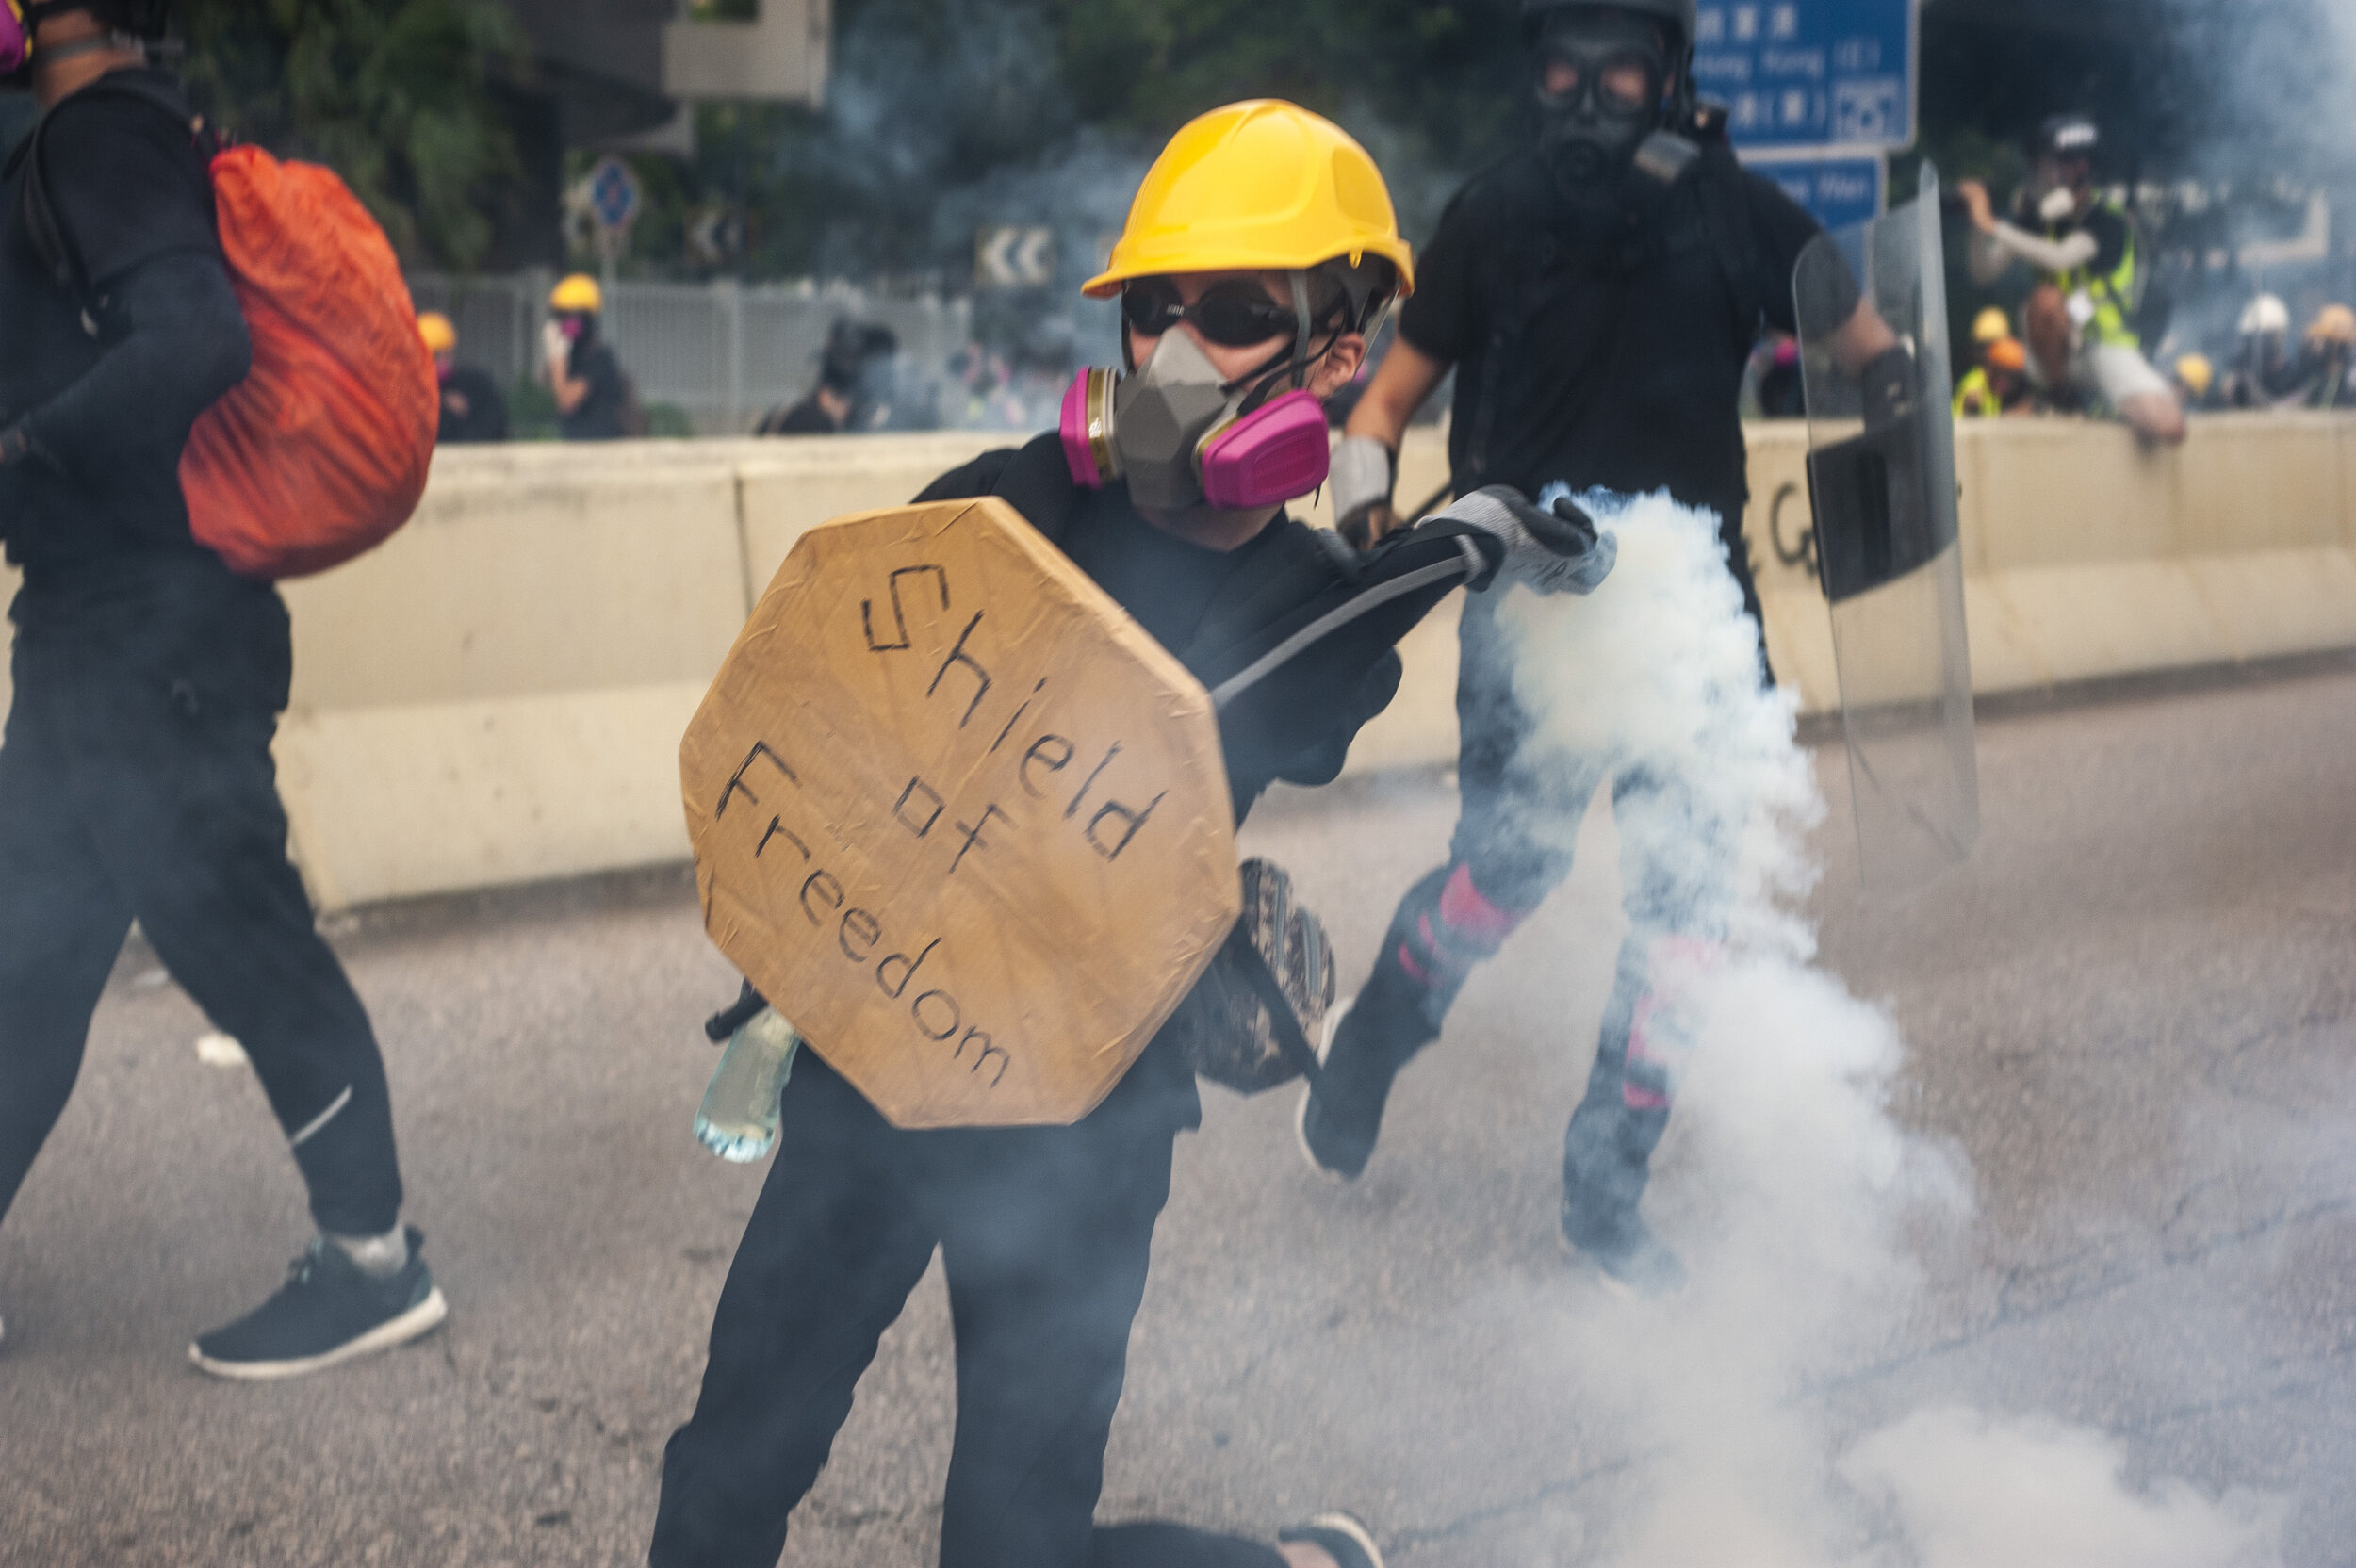  A pro-democracy protester hurls a tear gas canister back at riot police during a violent confrontation between police and protesters in Kwun Tong on August 24, 2019. What had began as a march to protest surveillance and facial recognition technology